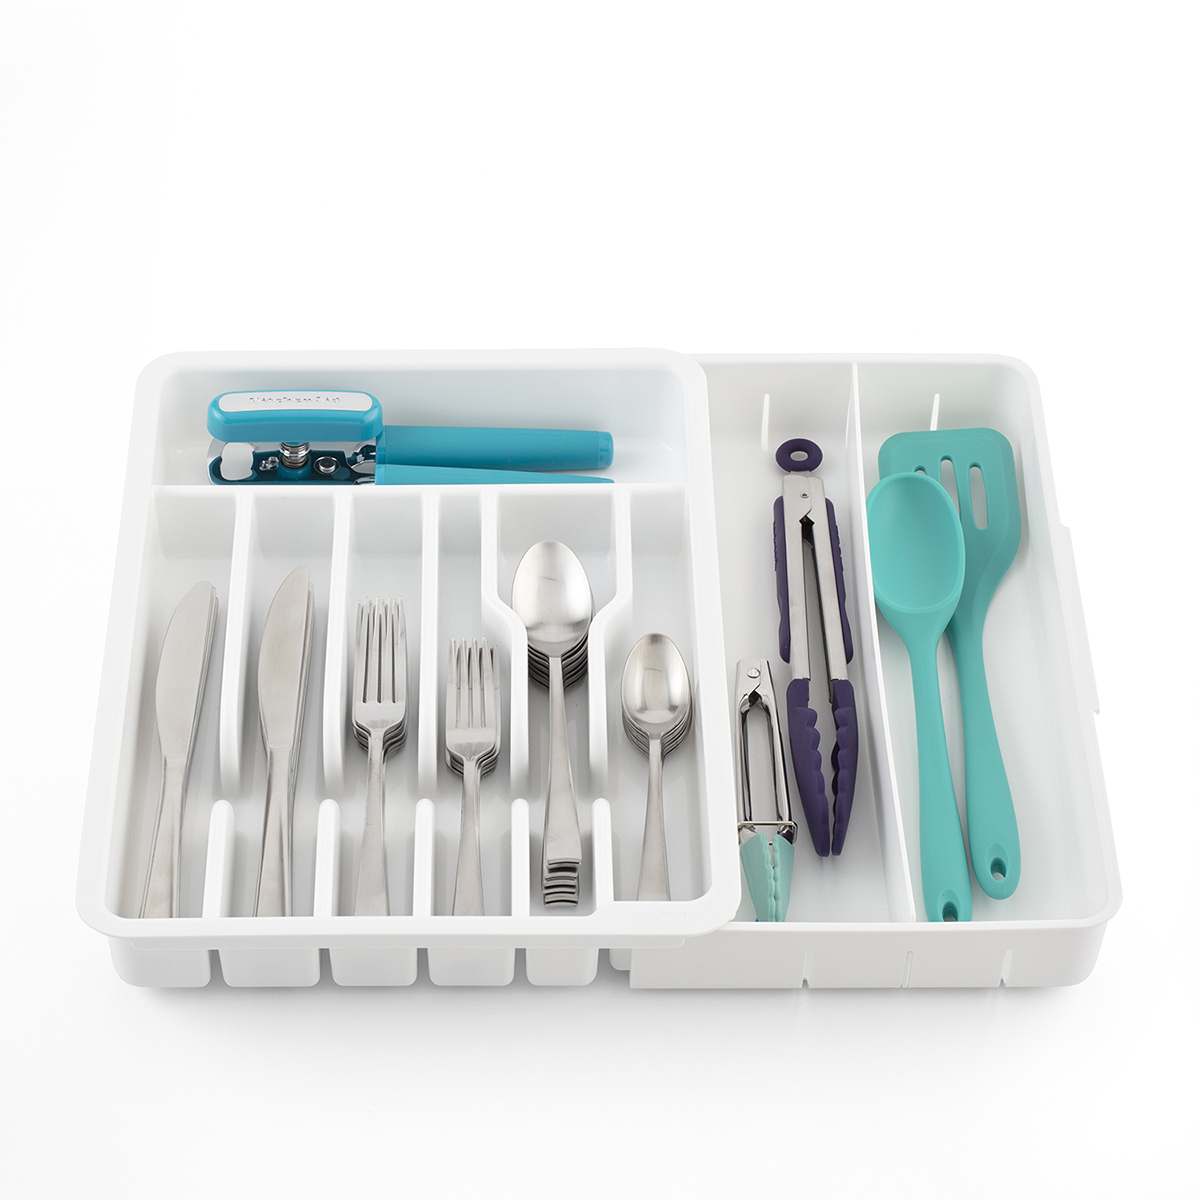 https://www.containerstore.com/catalogimages/393900/10082705-DrawerFit-Expandable%20Utensi.jpg